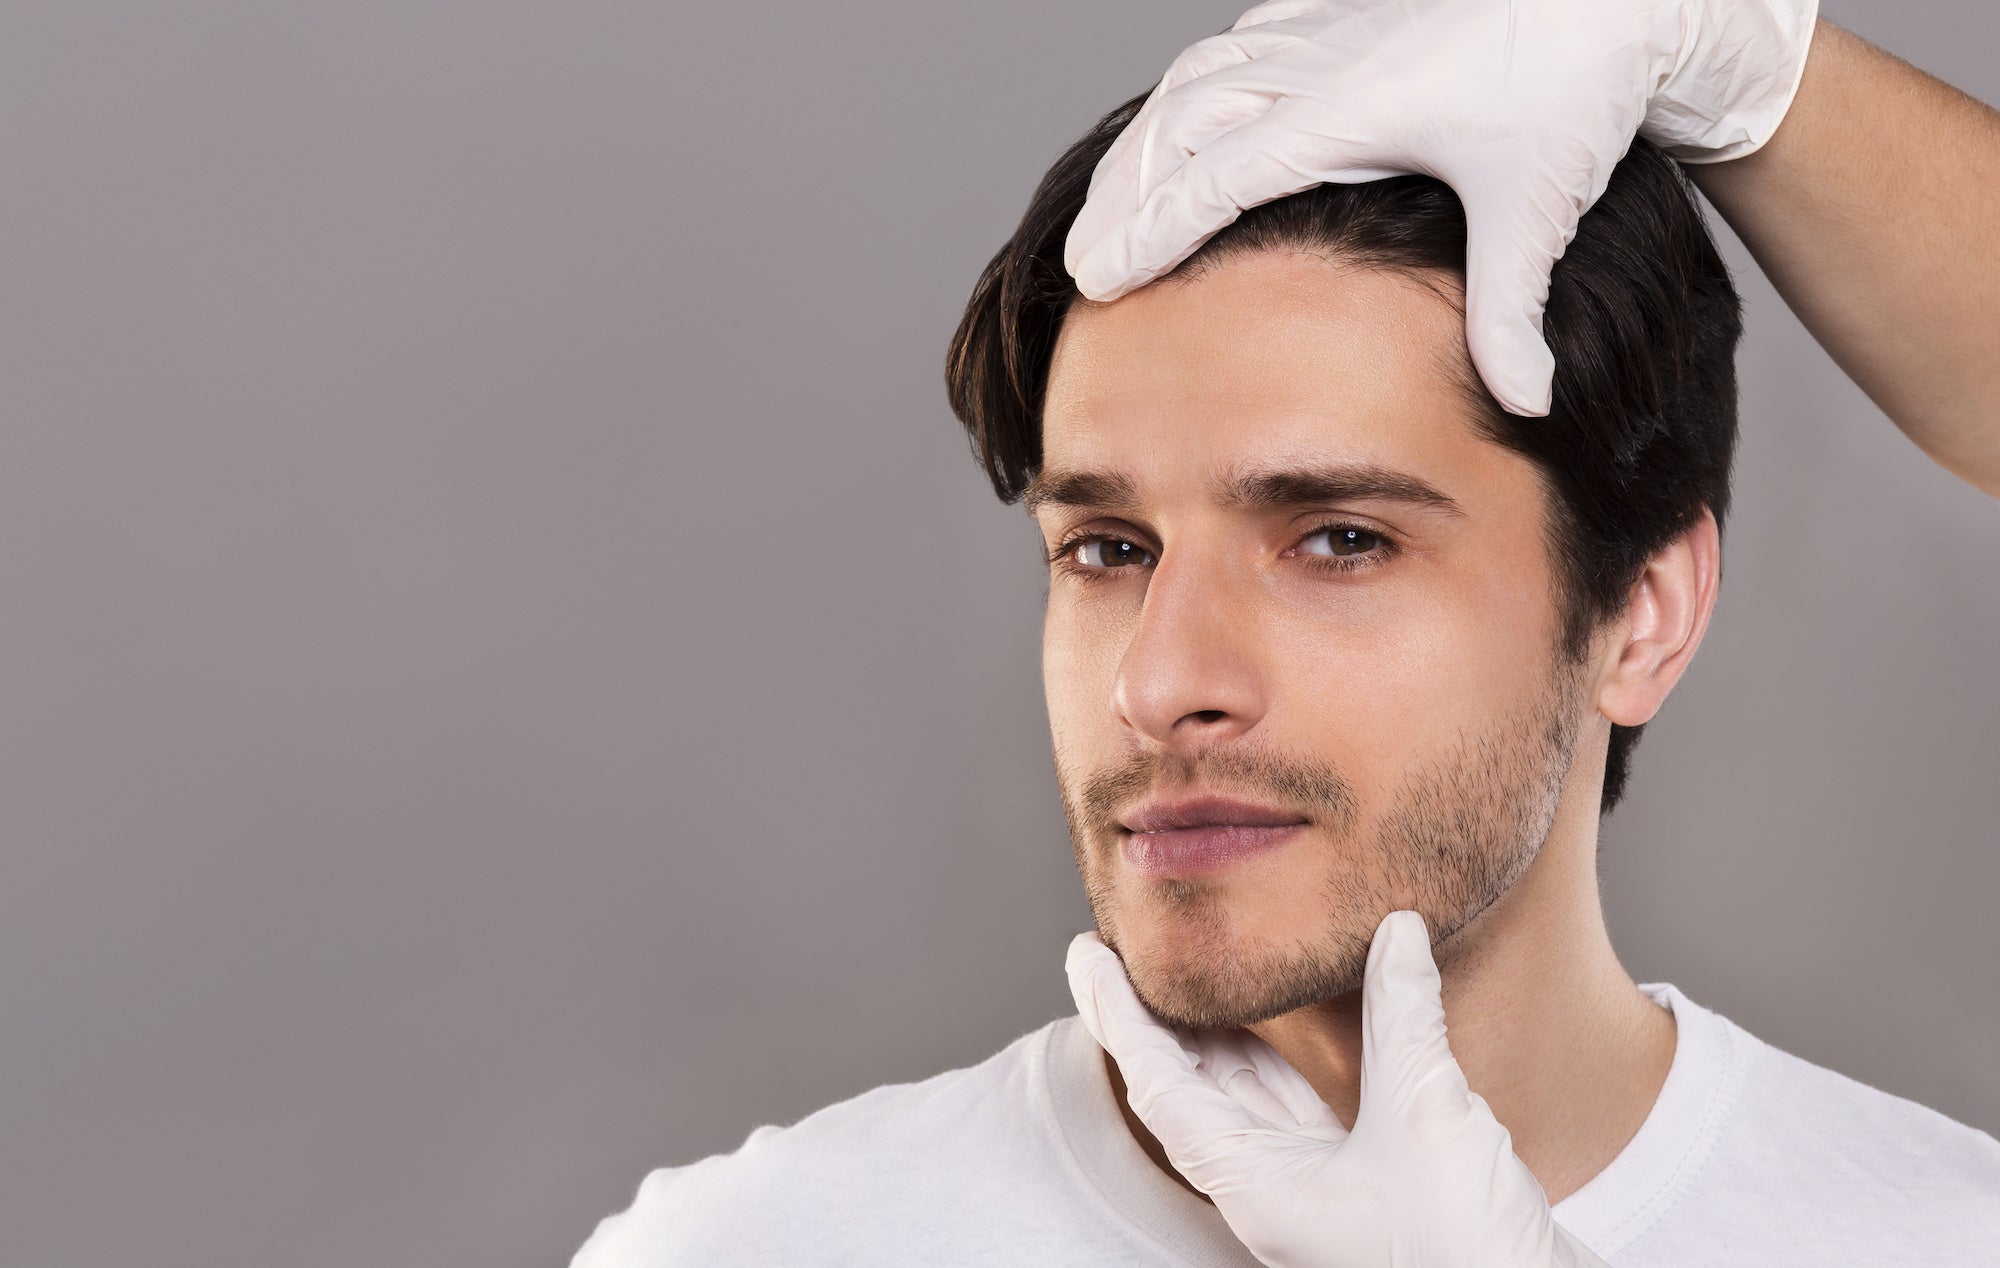 The Top 10 Most Popular Male Cosmetic Procedures